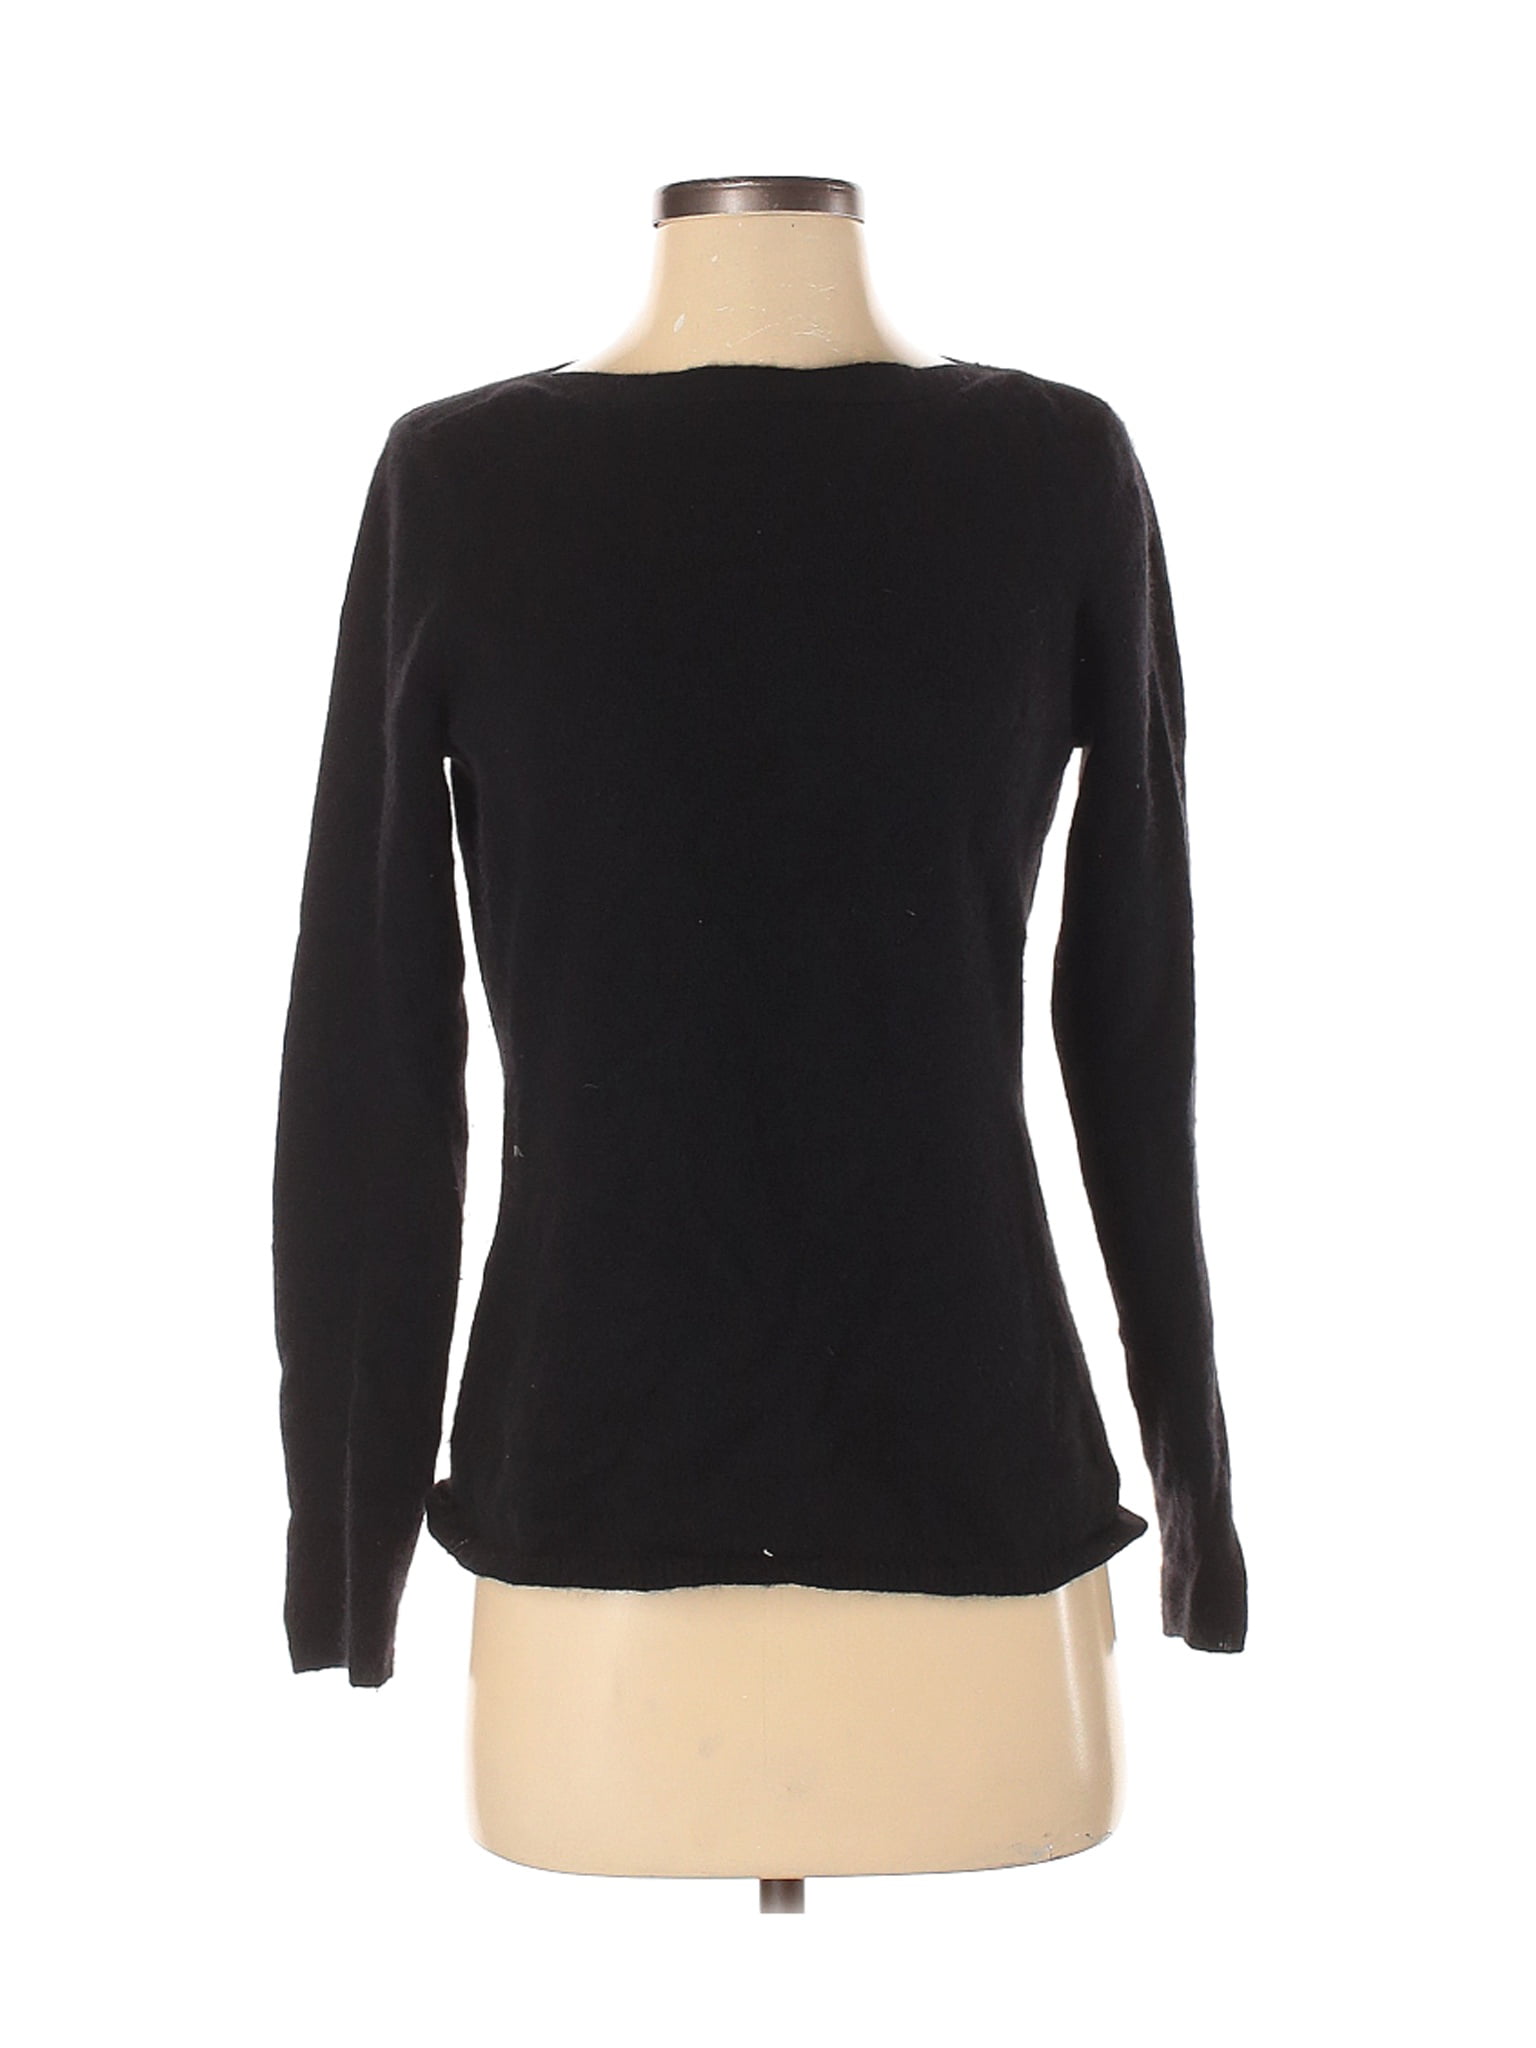 Peck & Peck - Pre-Owned Peck & Peck Women's Size S Cashmere Pullover ...